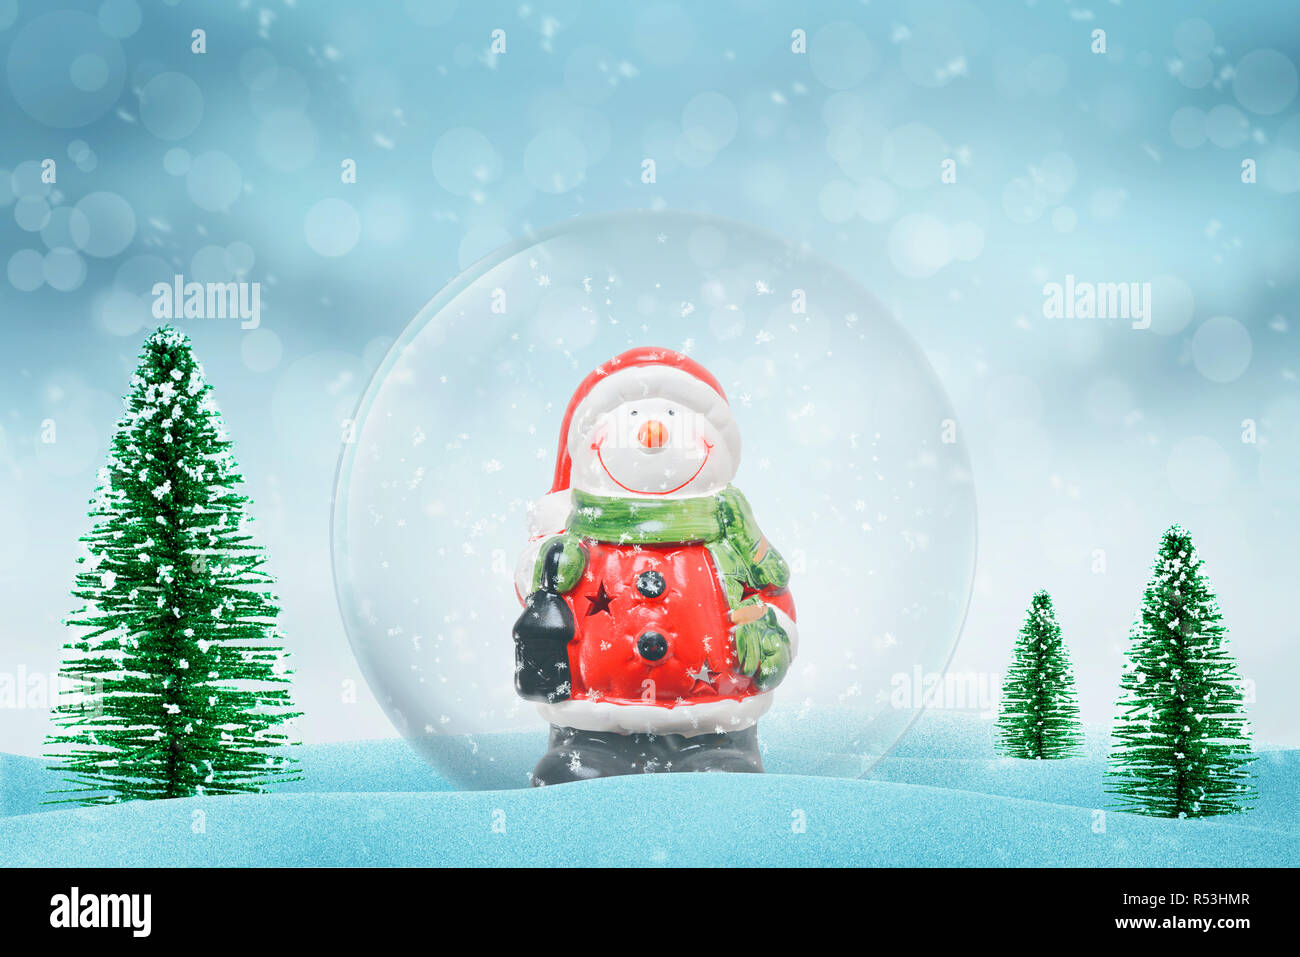 Christmas magic snow ball with Snowman. Snow falls in background. Christmas trees beside. Stock Photo